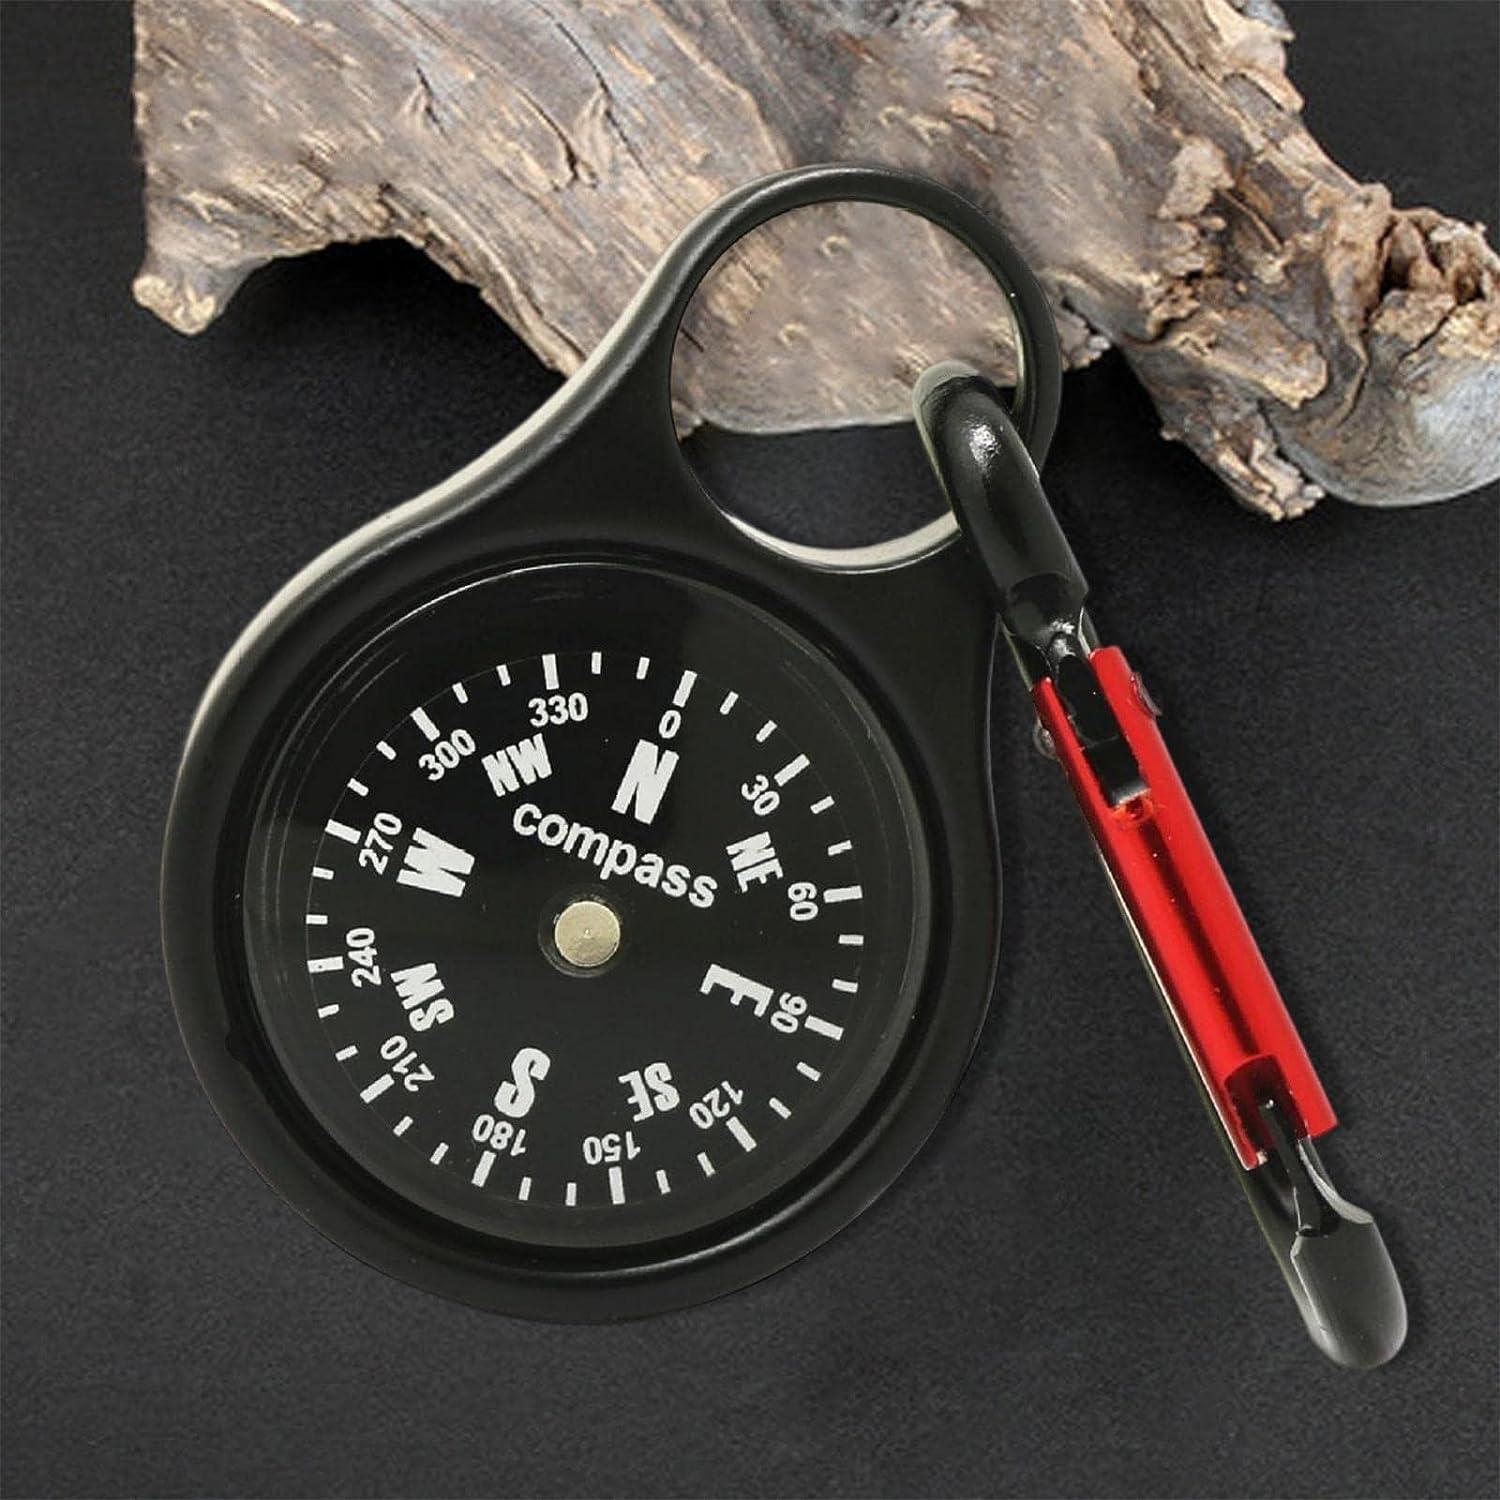 Black Lightweight Mini Outdoor Camping Survival Thermometer Compass Key  Chain